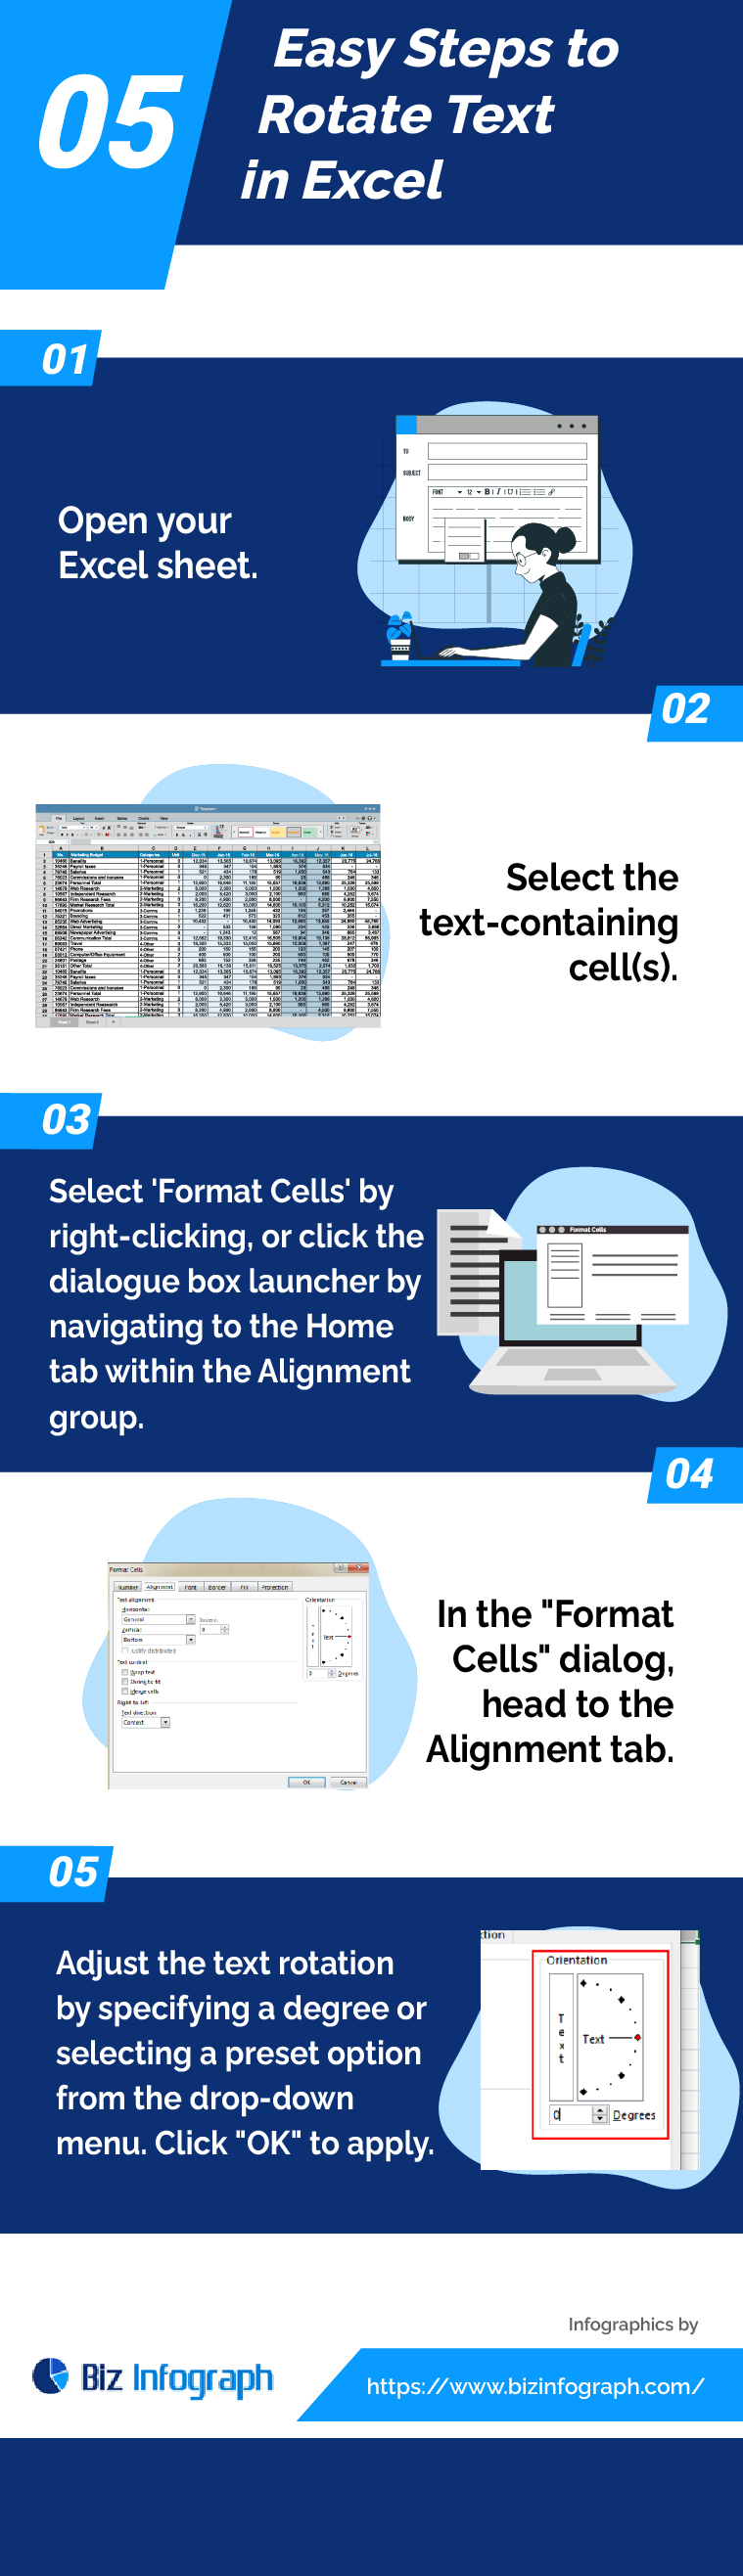 5 Easy Steps to Rotate Text in Excel